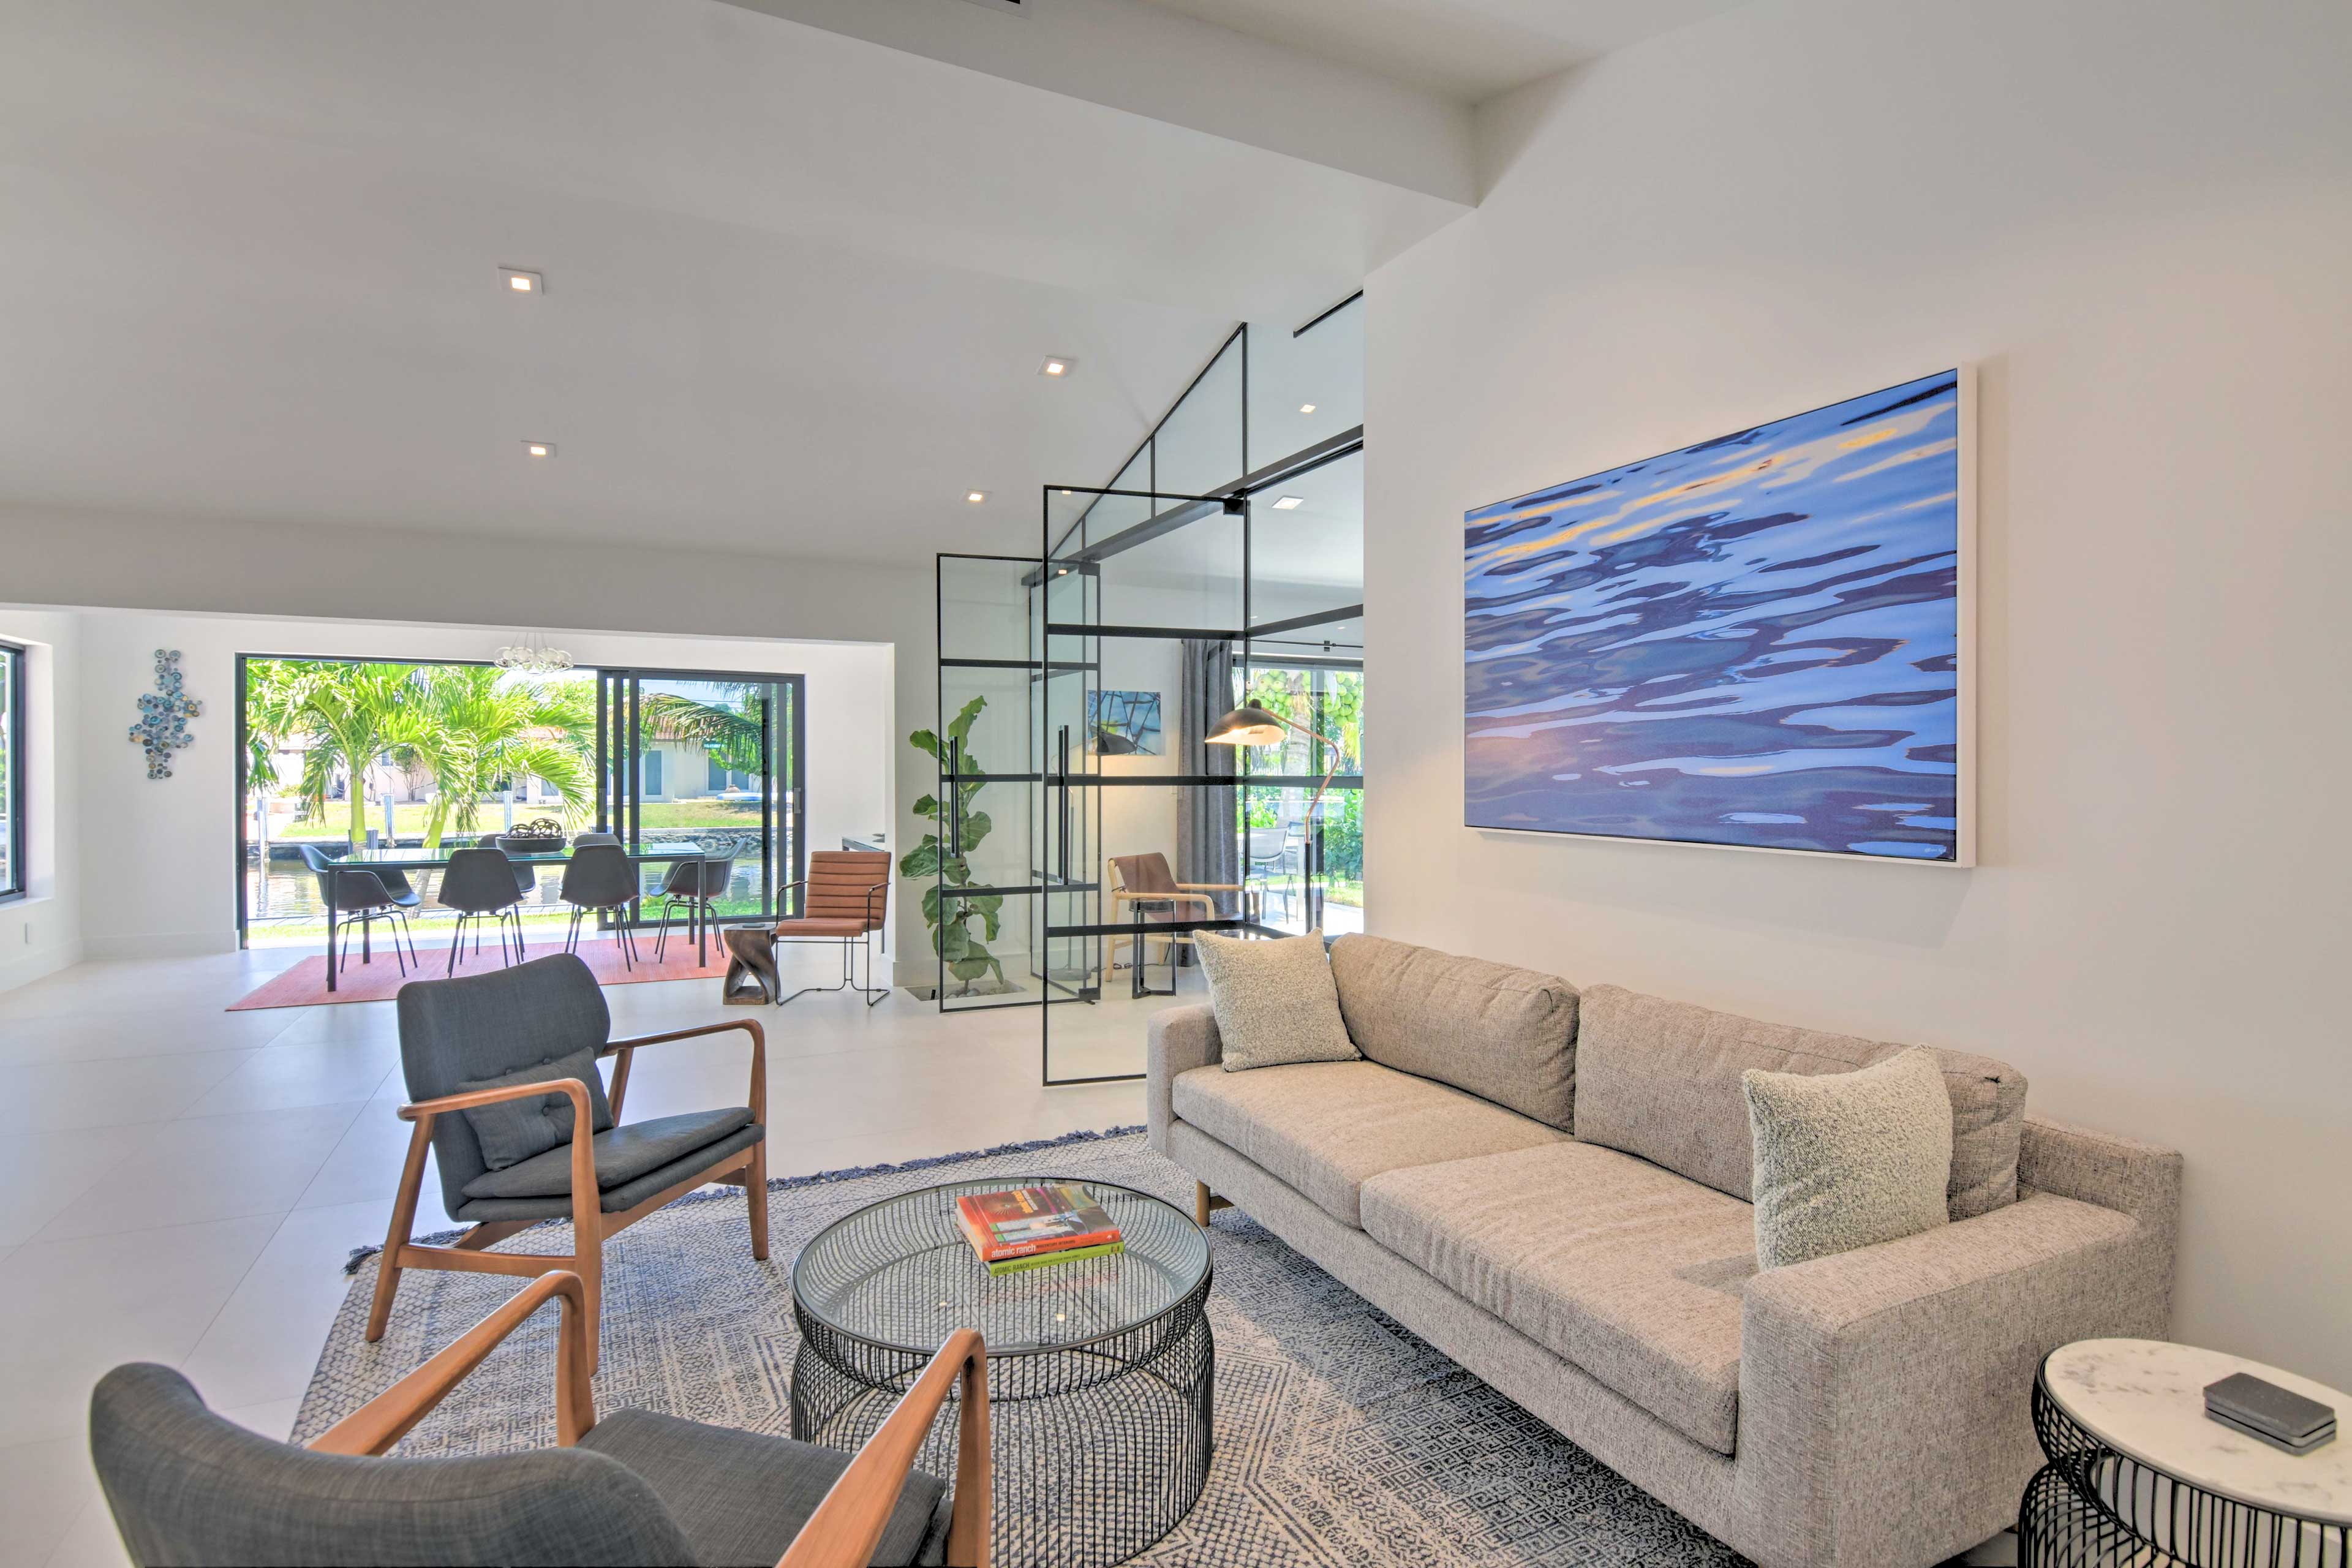 Property Image 1 - Luxe Wilton Manors Home w/ Private Boat Dock